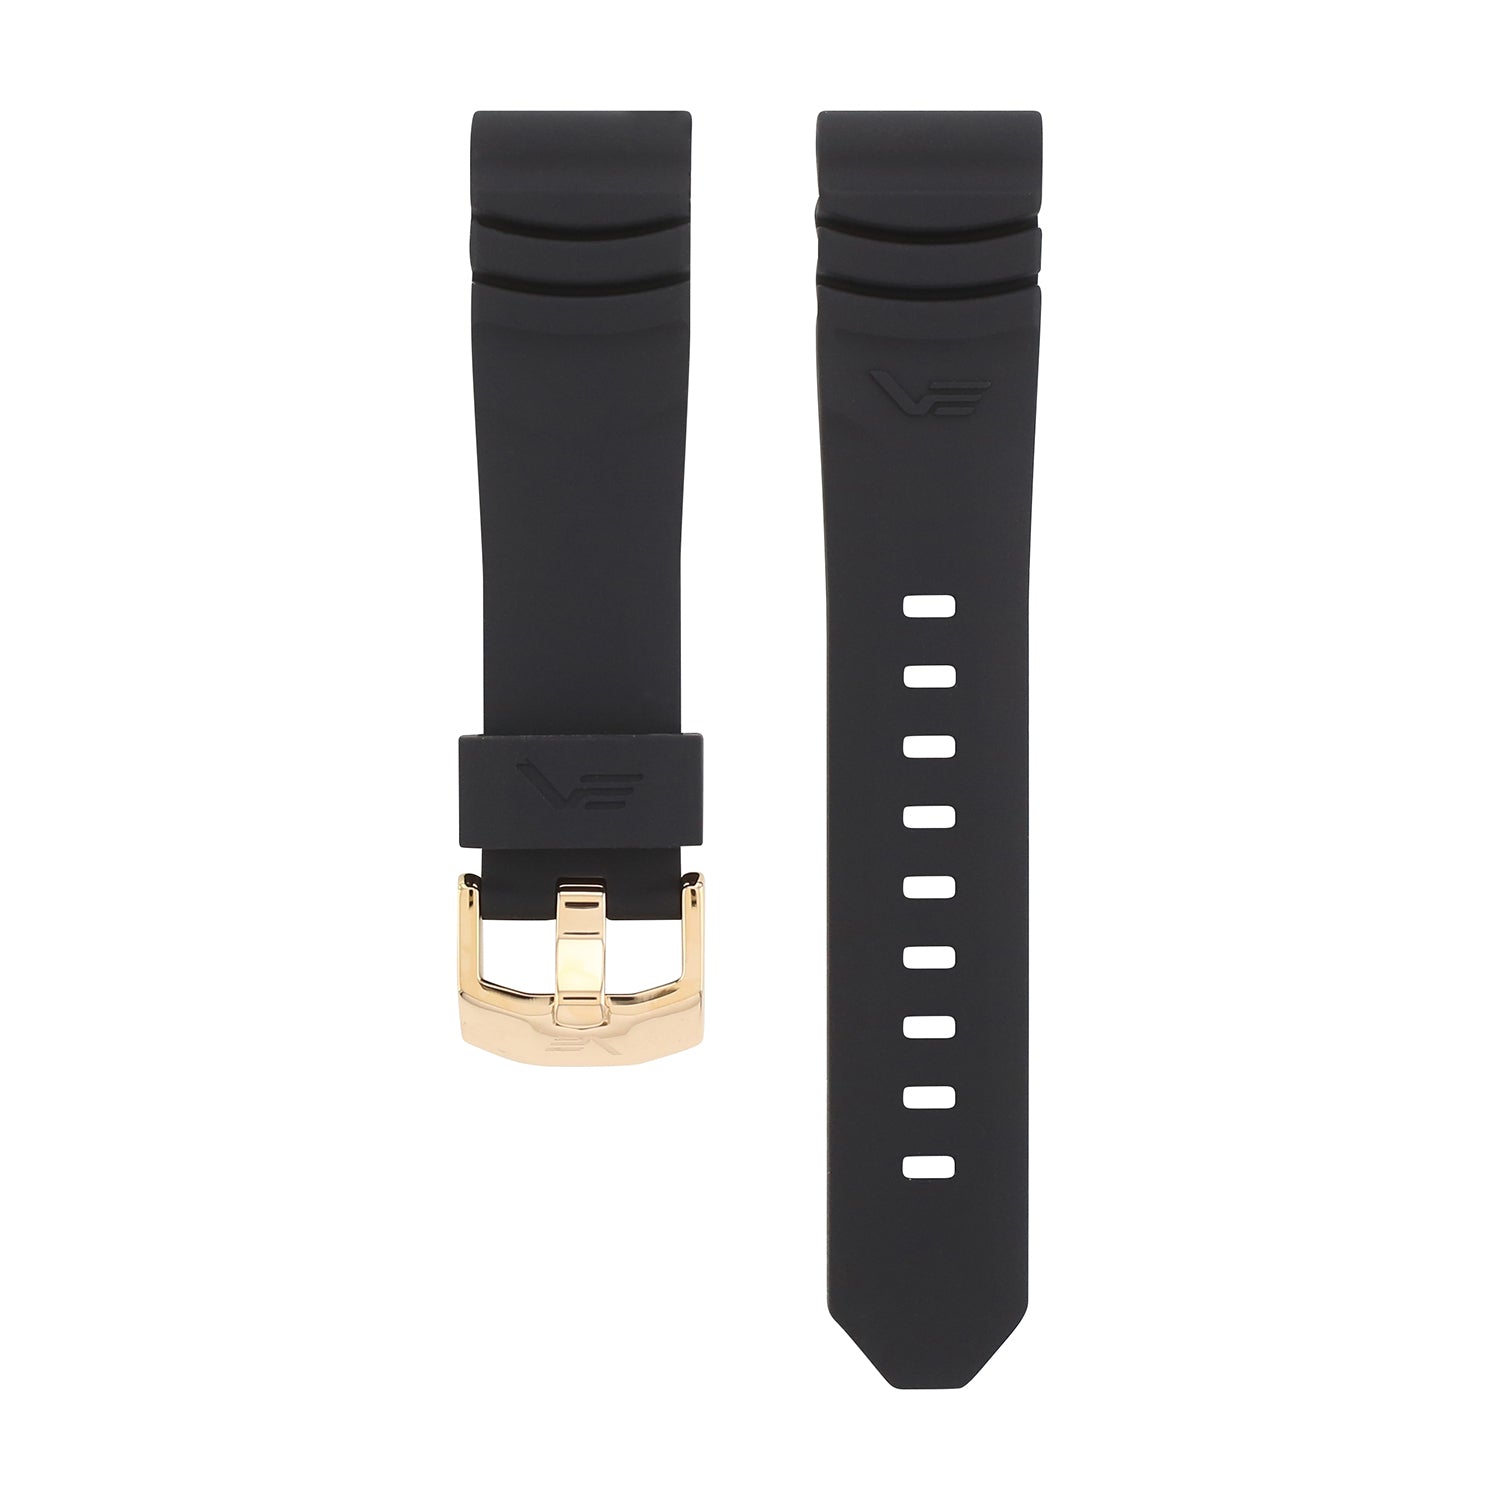 NUCLEAR SUBMARINE BLACK SILICONE STRAP 22mm - GOLD BUCKLE